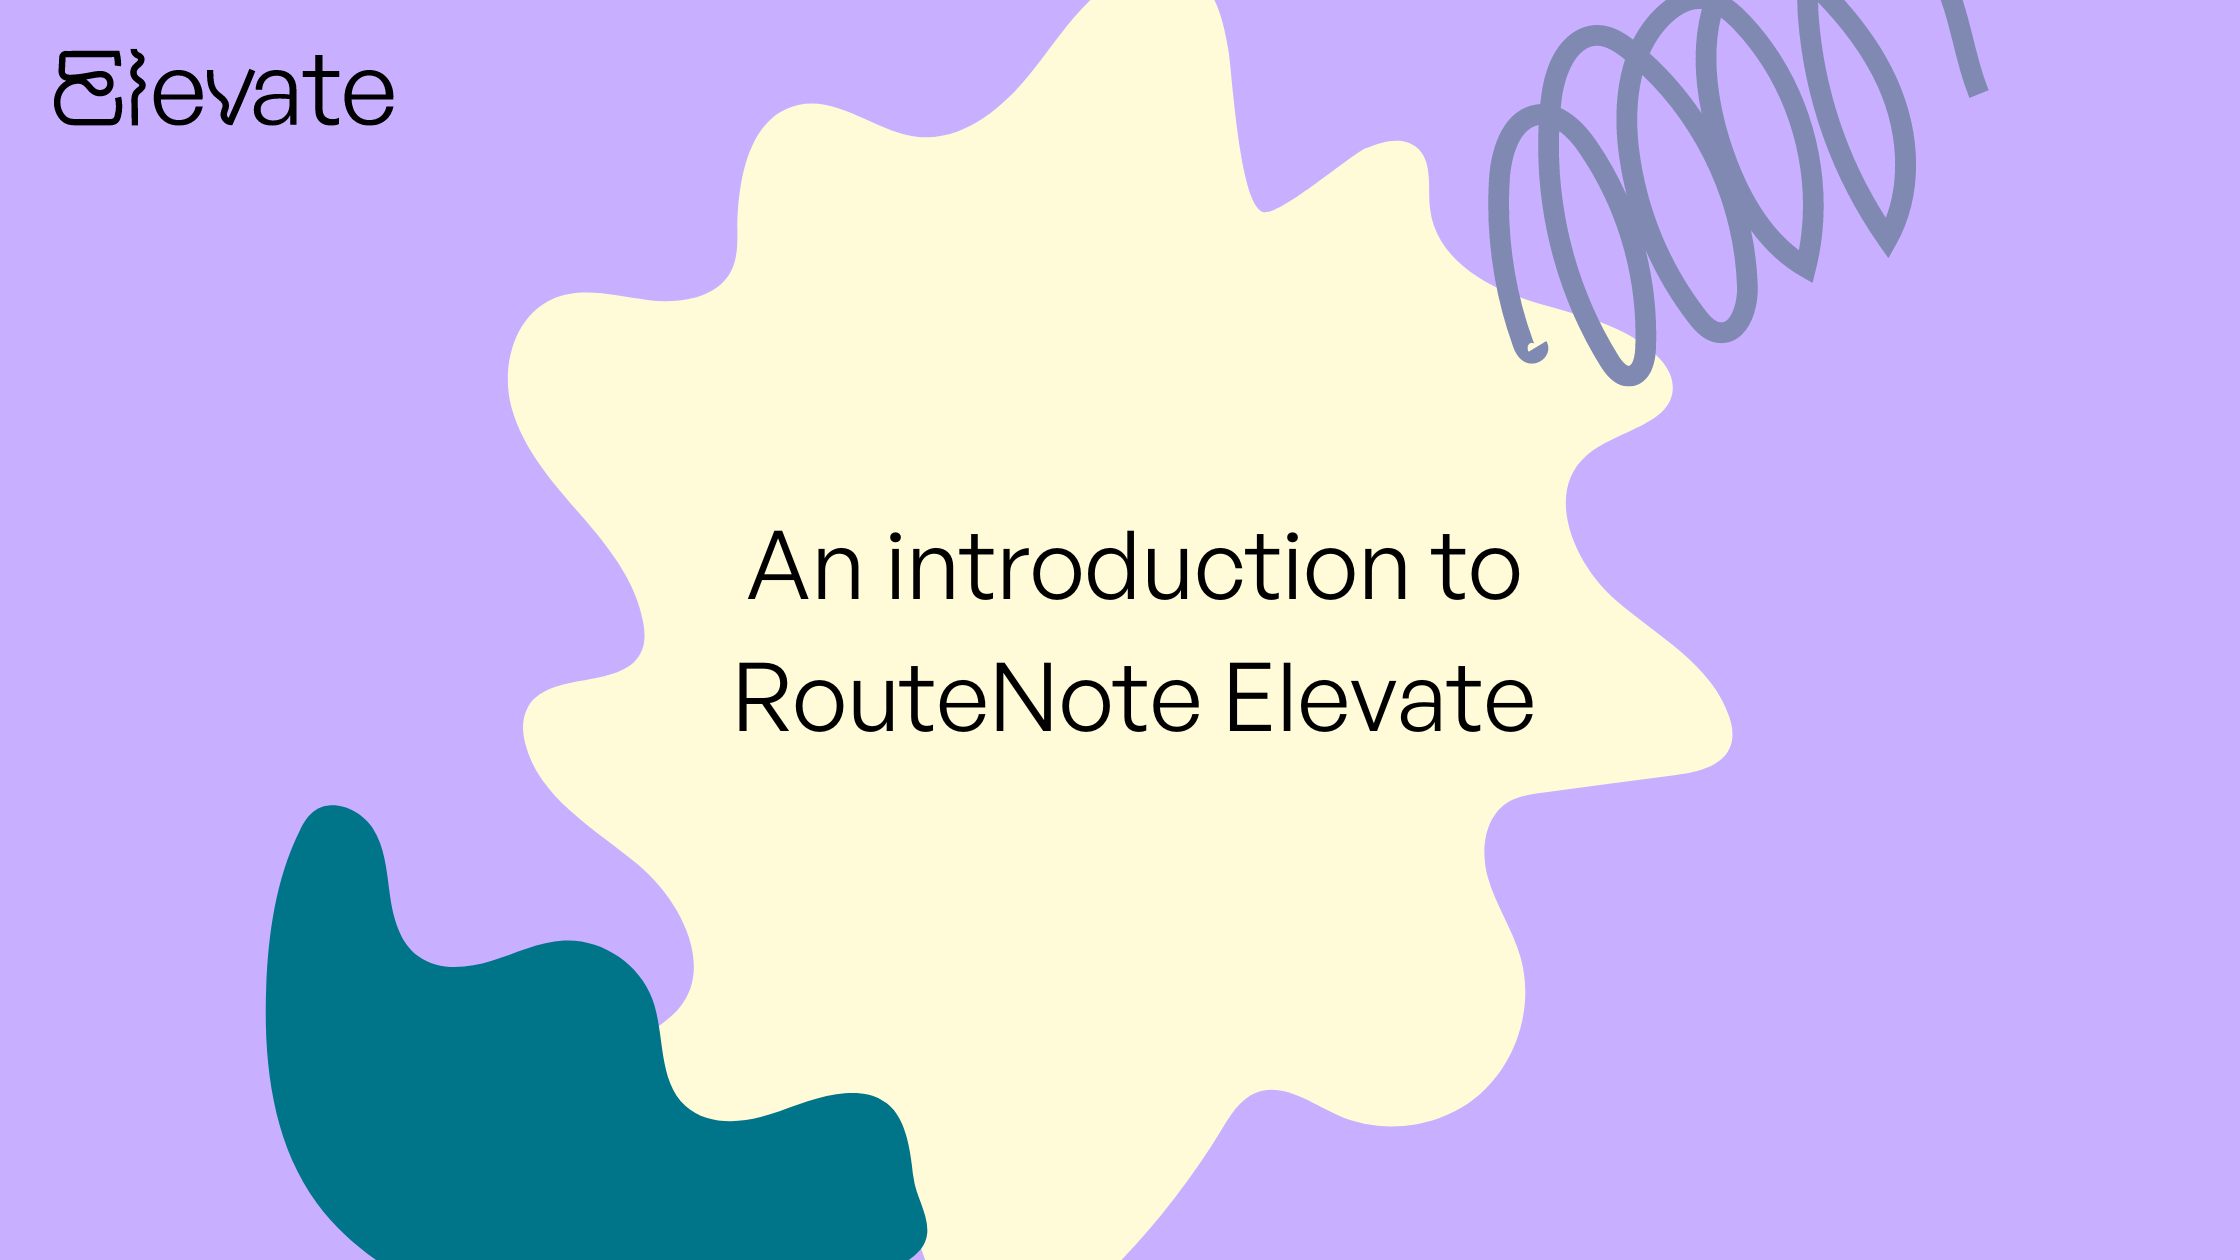 "An introduction to RouteNote Elevate"